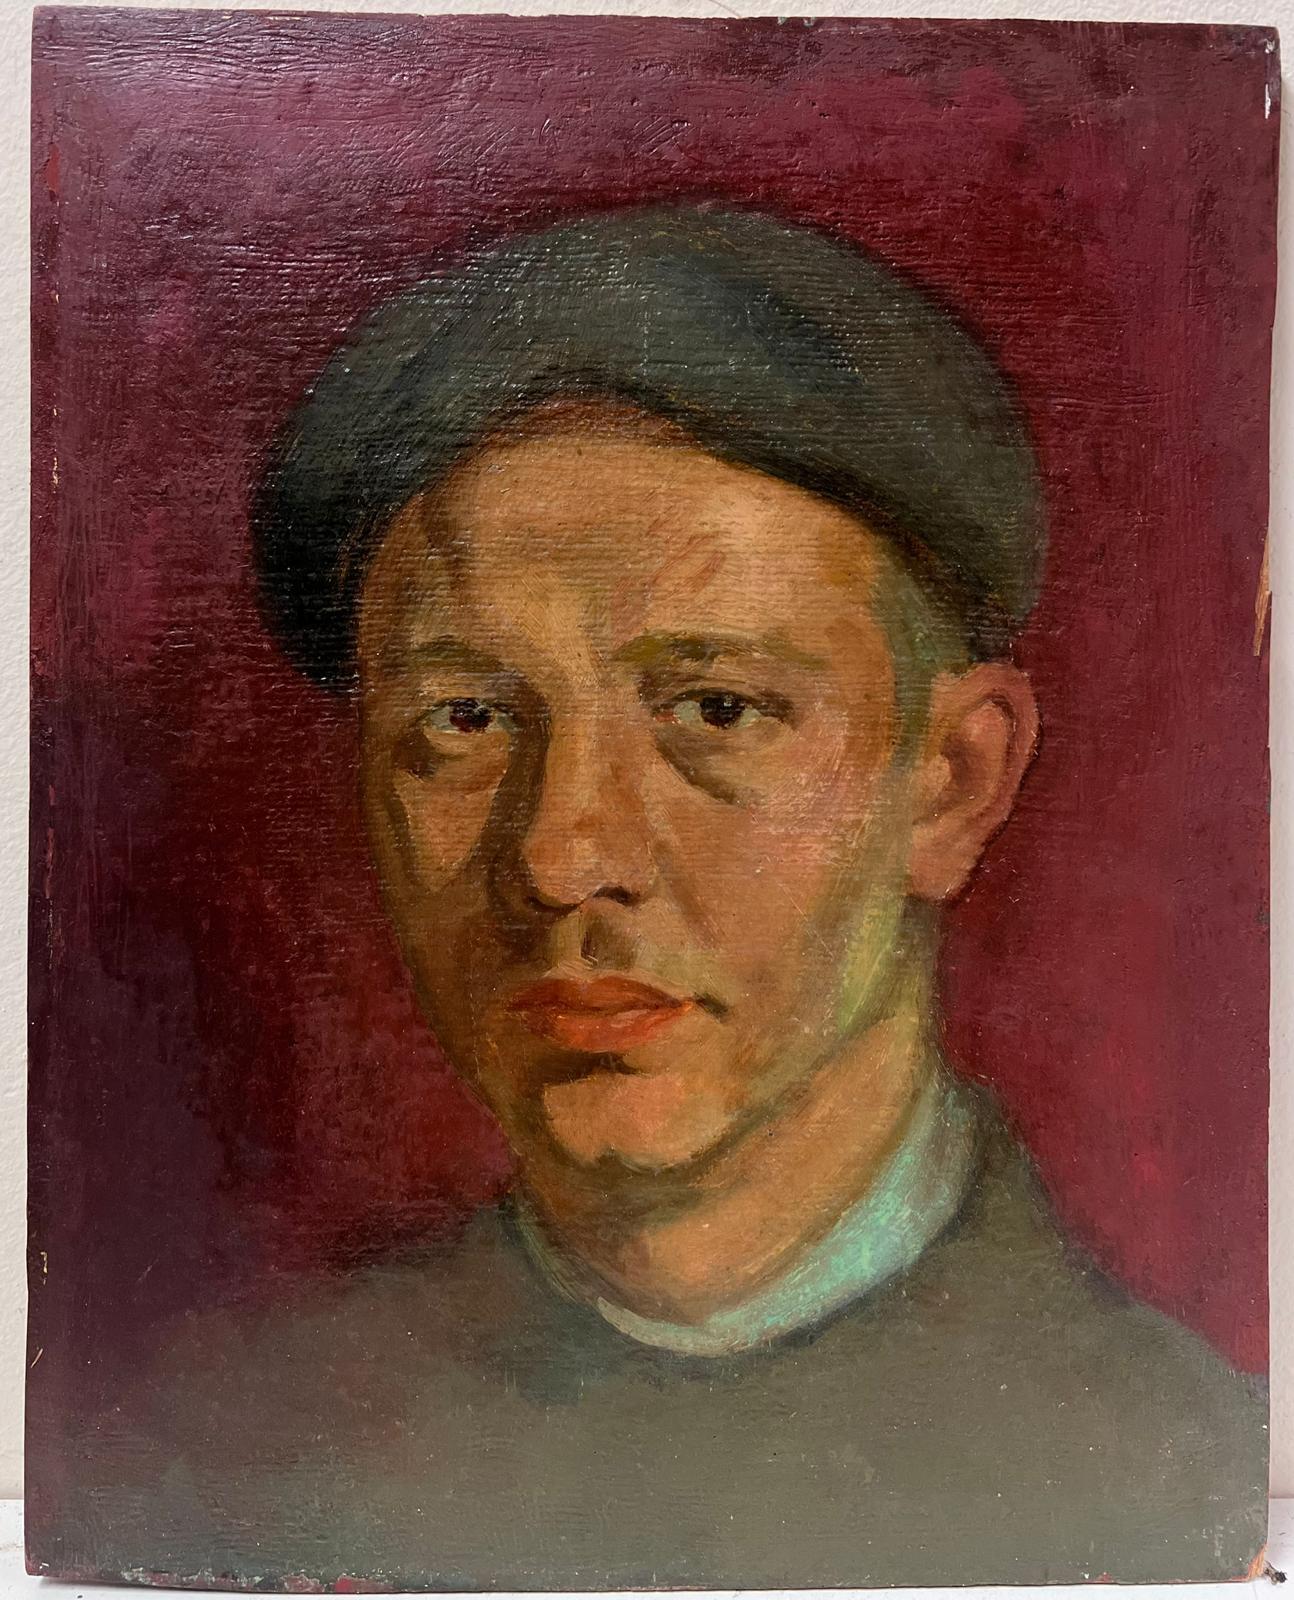 Portrait of Man in Cap
by Jacob Markiel (Polish 1911-2008) *See notes below oil on board, unframed
board: 15 x 11.75 inches
provenance: the artists estate, south of France
condition: very good and sound condition

Jacob Markiel was born into a